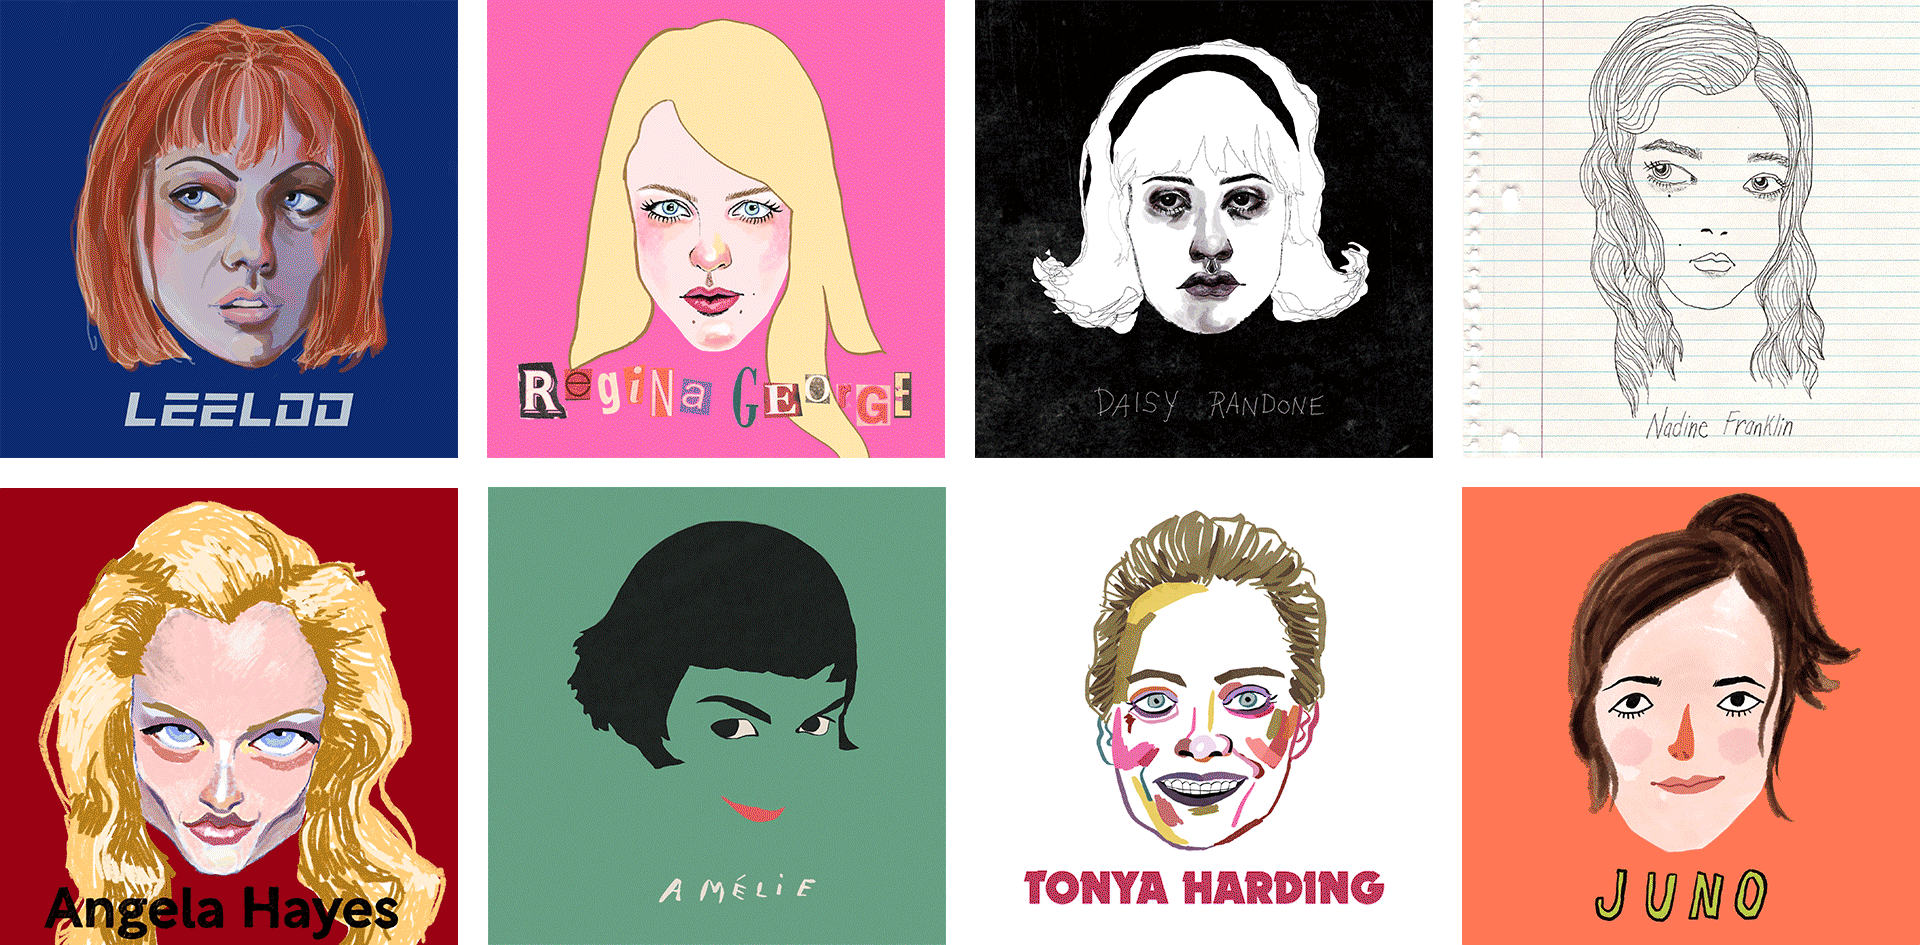 A GIF of a 4 x 2 image grid showing assorted illustrations of women film characters, drawn in various styles.